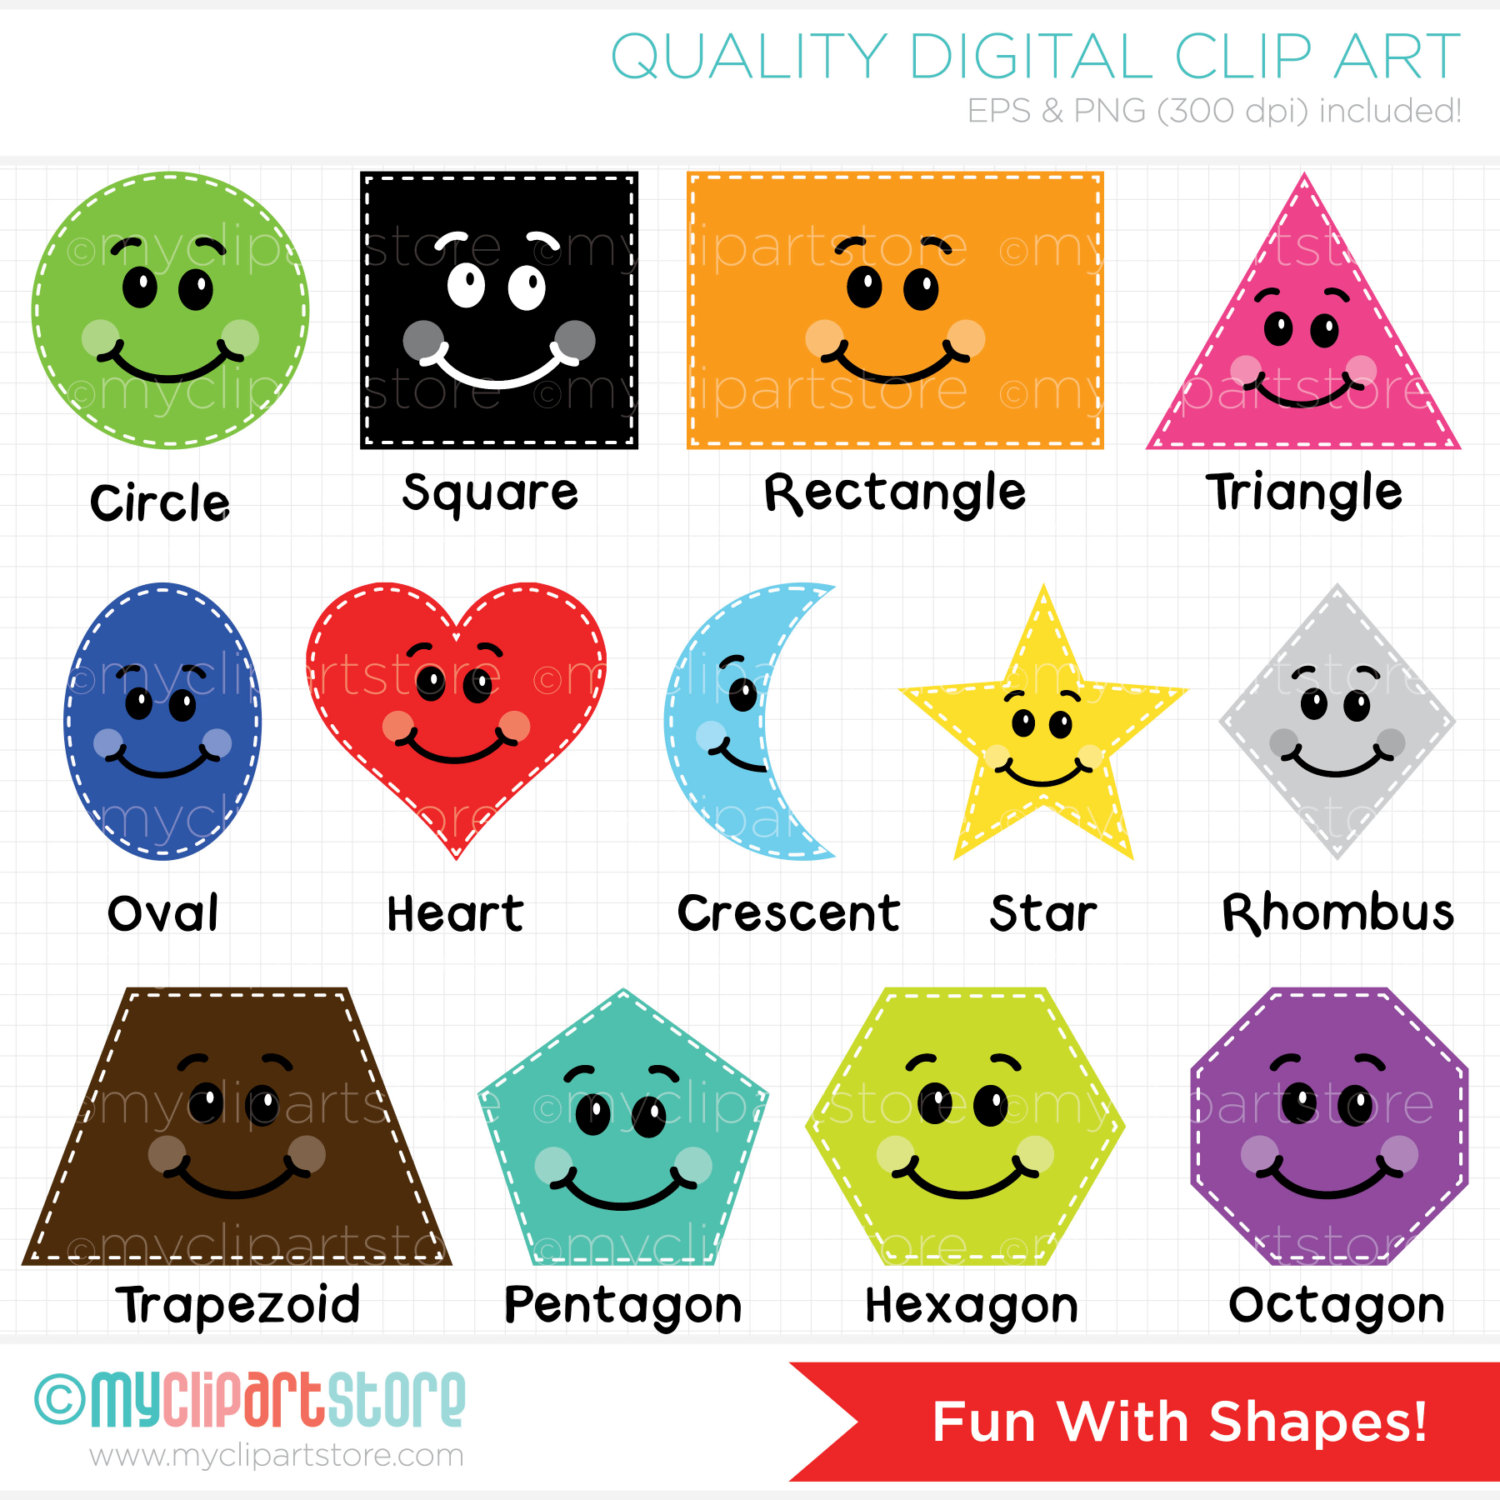 Shapes clipart - Clipground